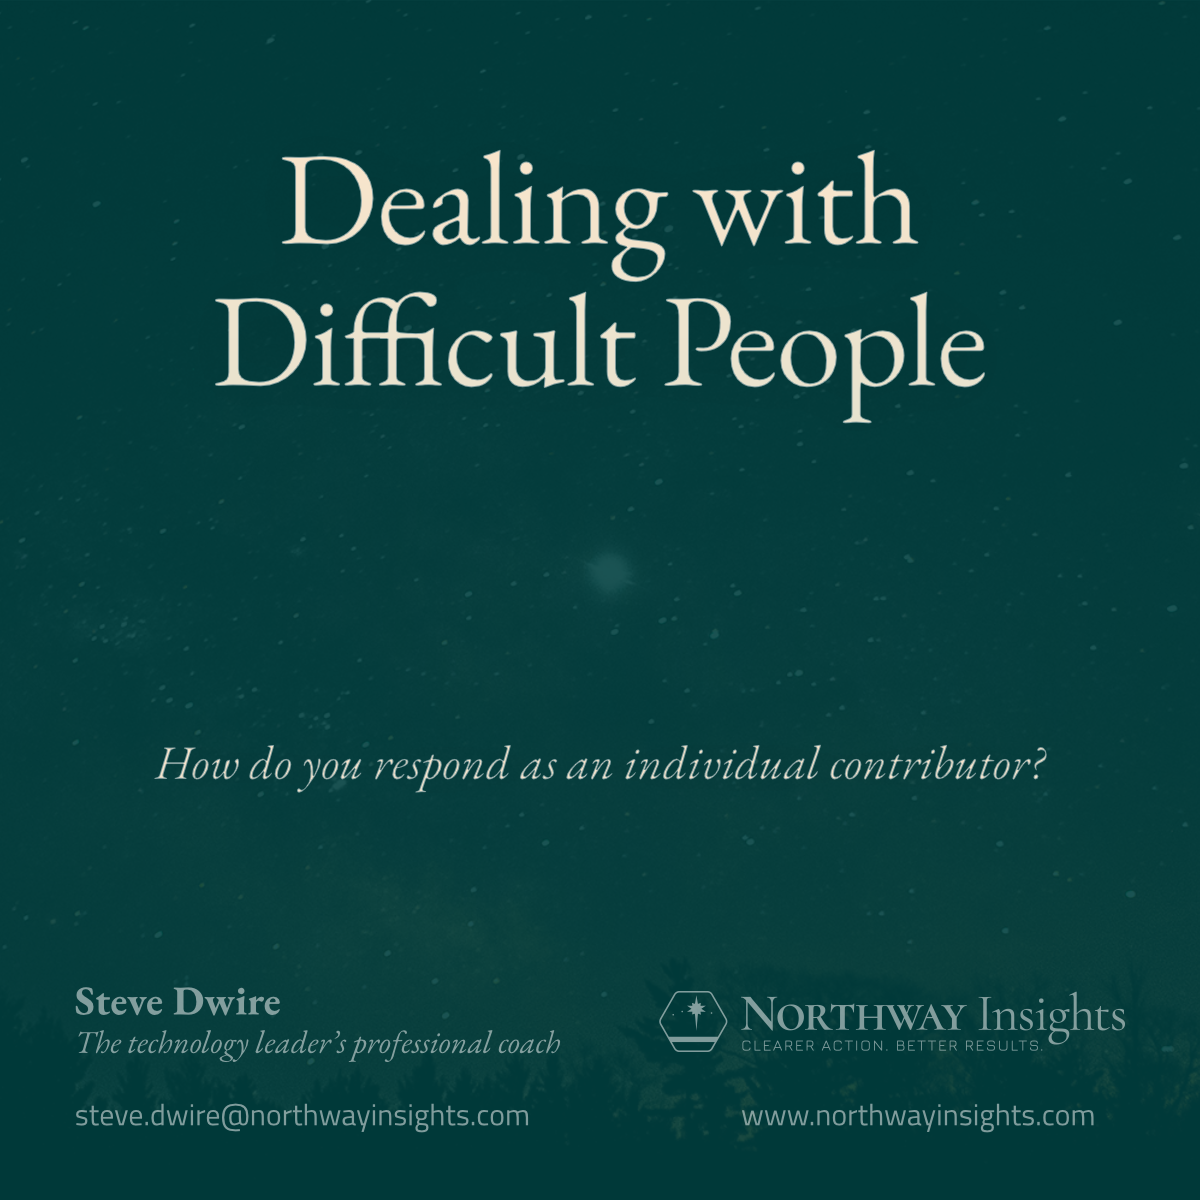 Dealing with difficult people